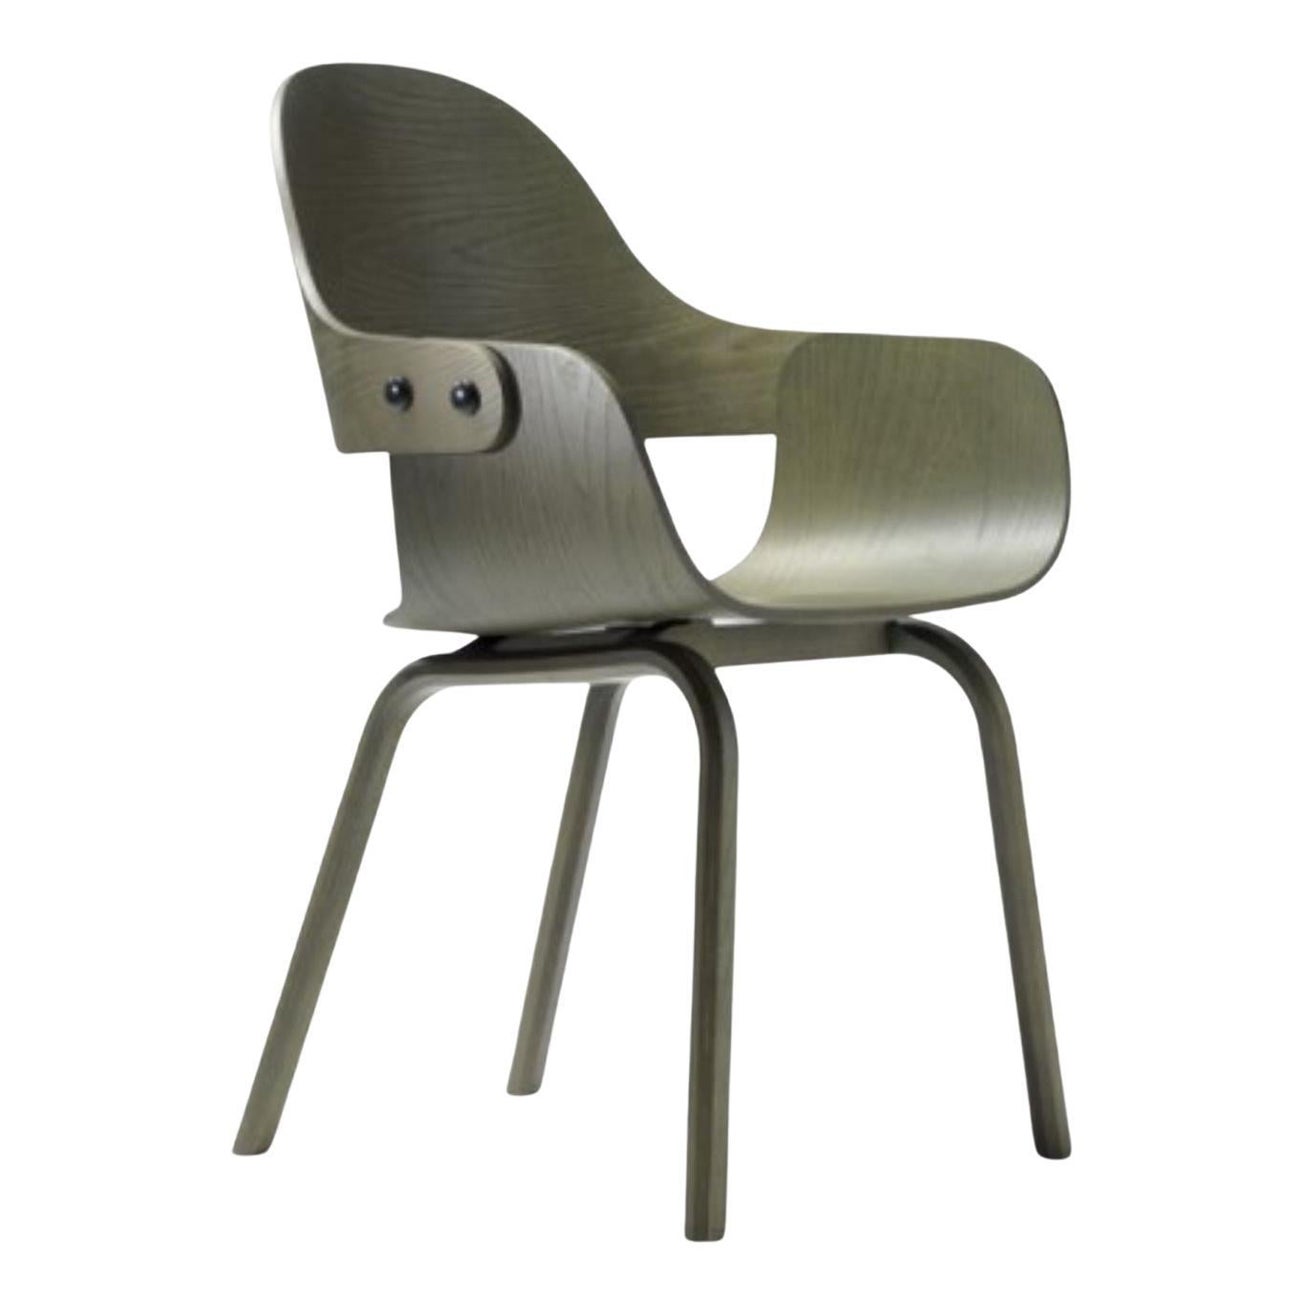 Show Time Nude 4 Legs Chair Green by Jaime Hayon For Sale